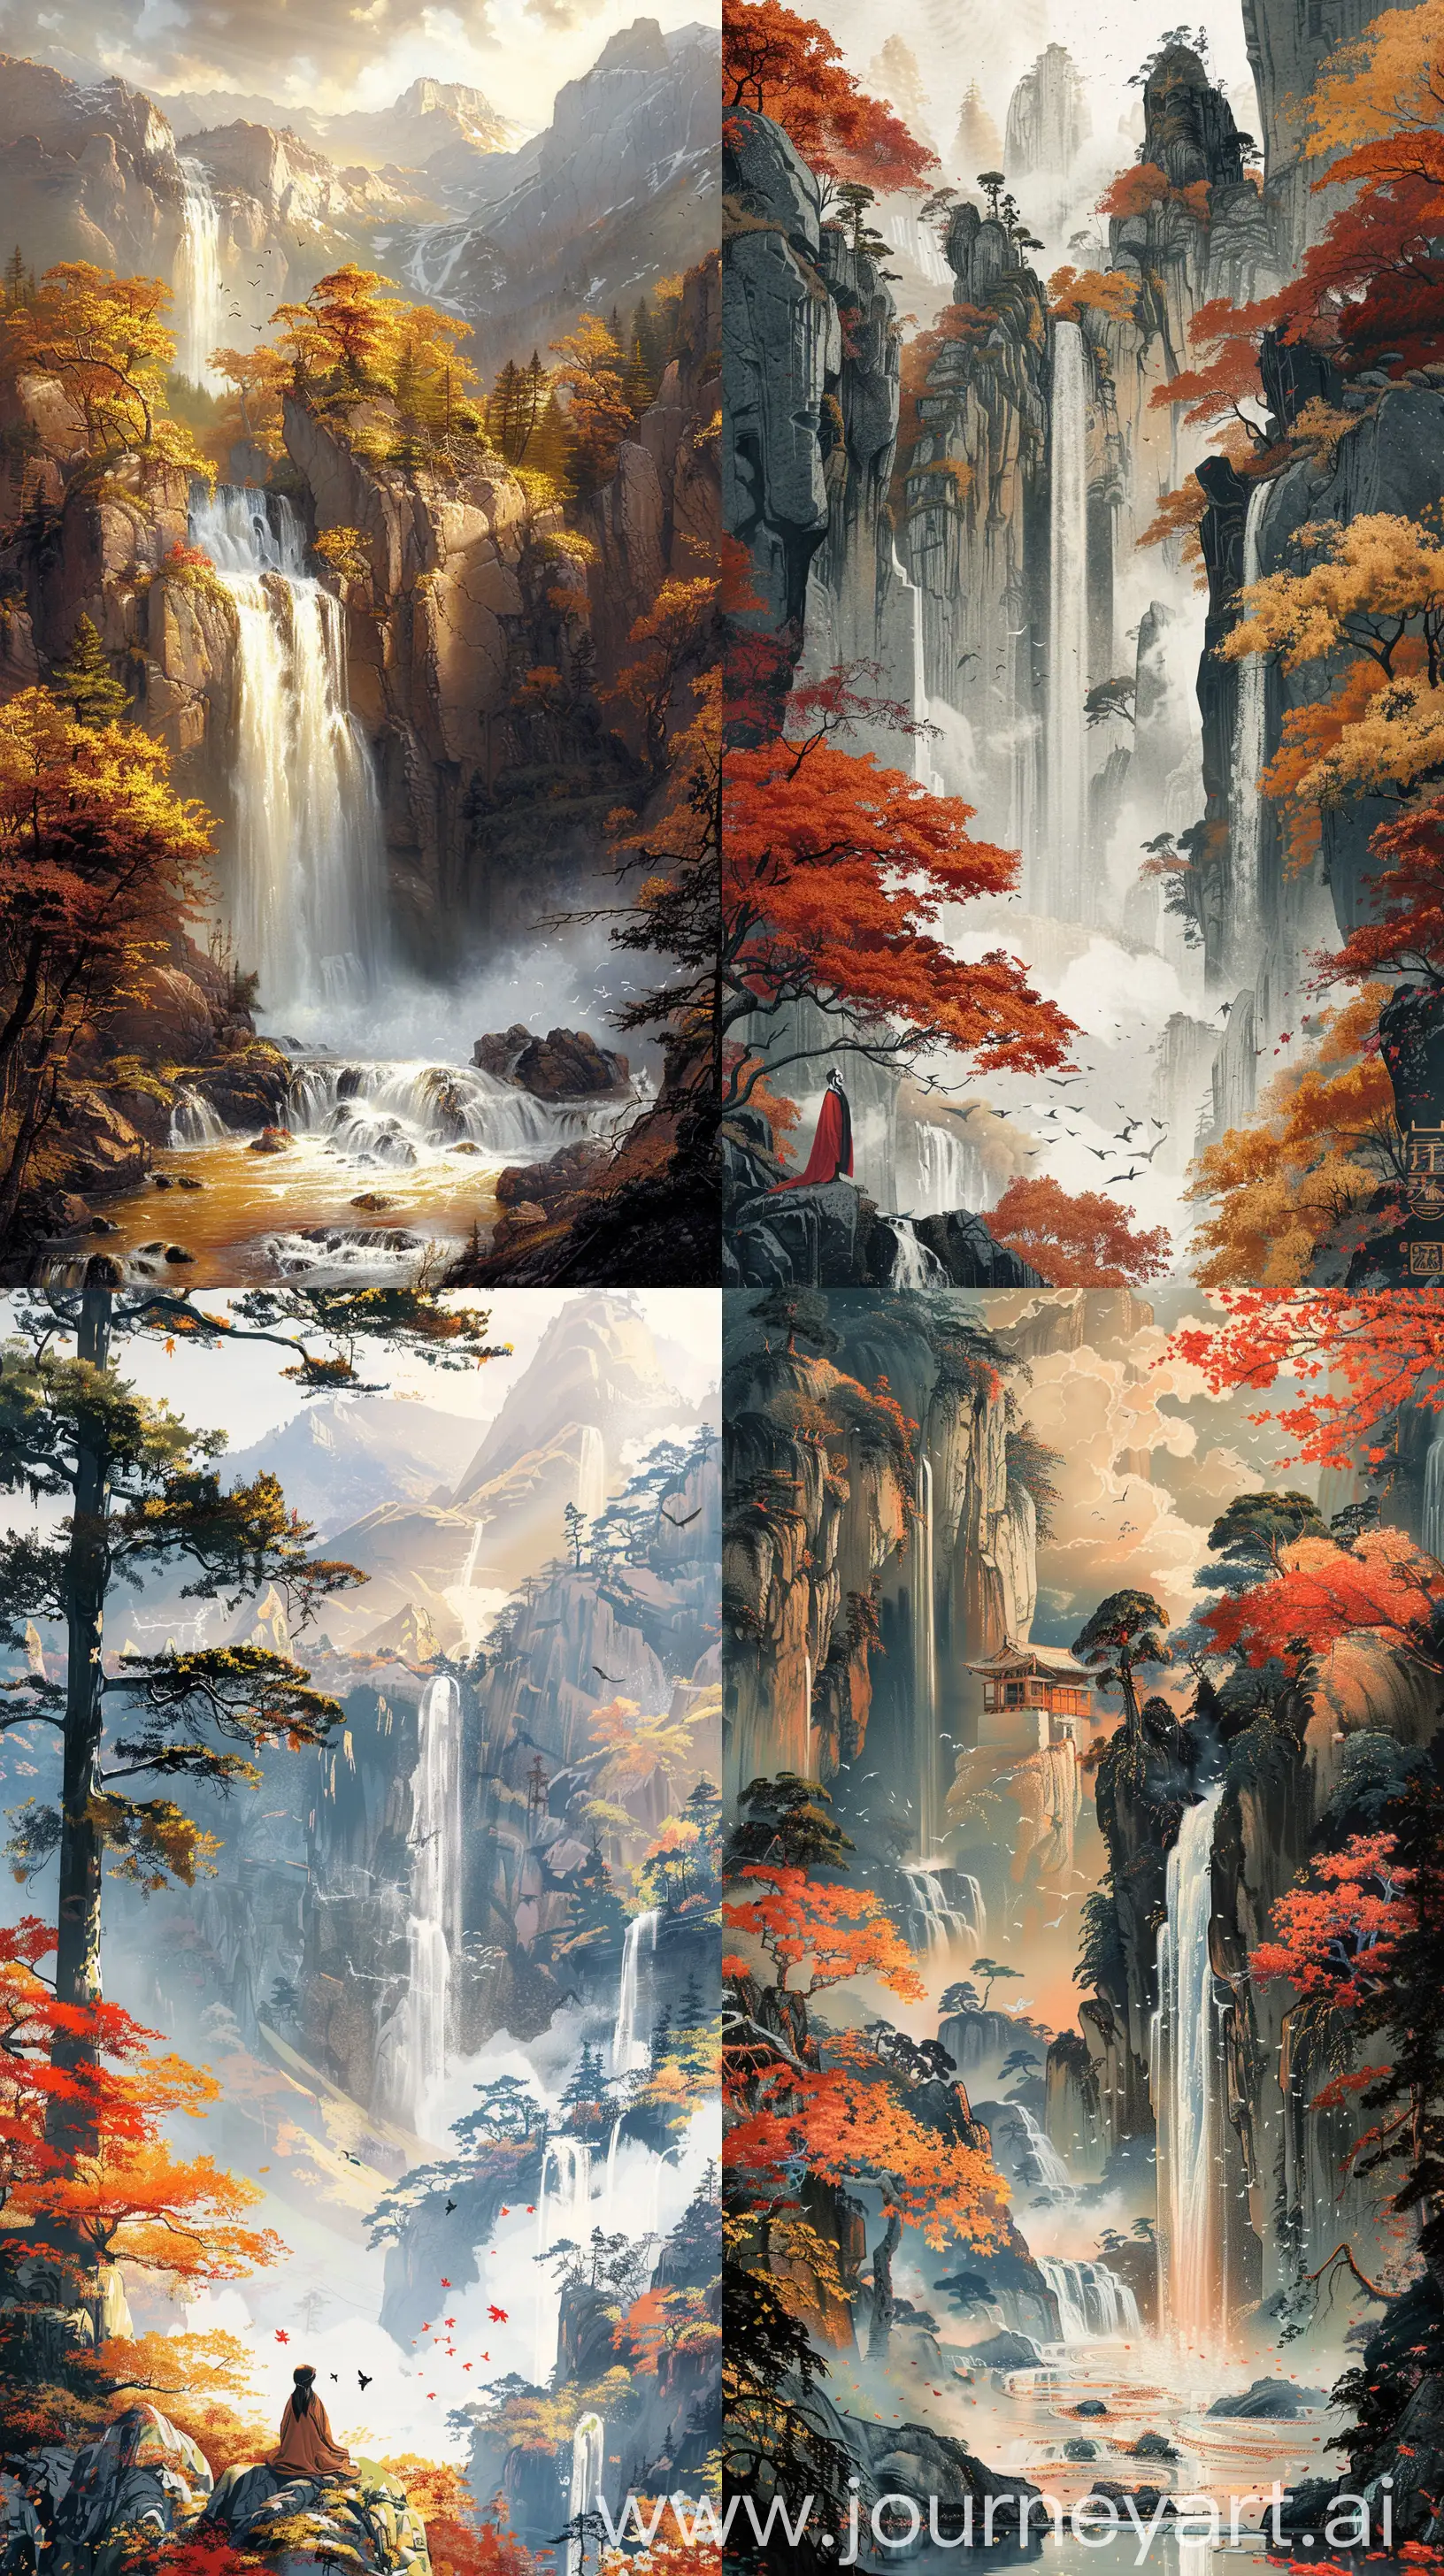 Autumn-Girl-by-a-Waterfall-in-a-Mountain-Canyon-with-Animals-and-Birds